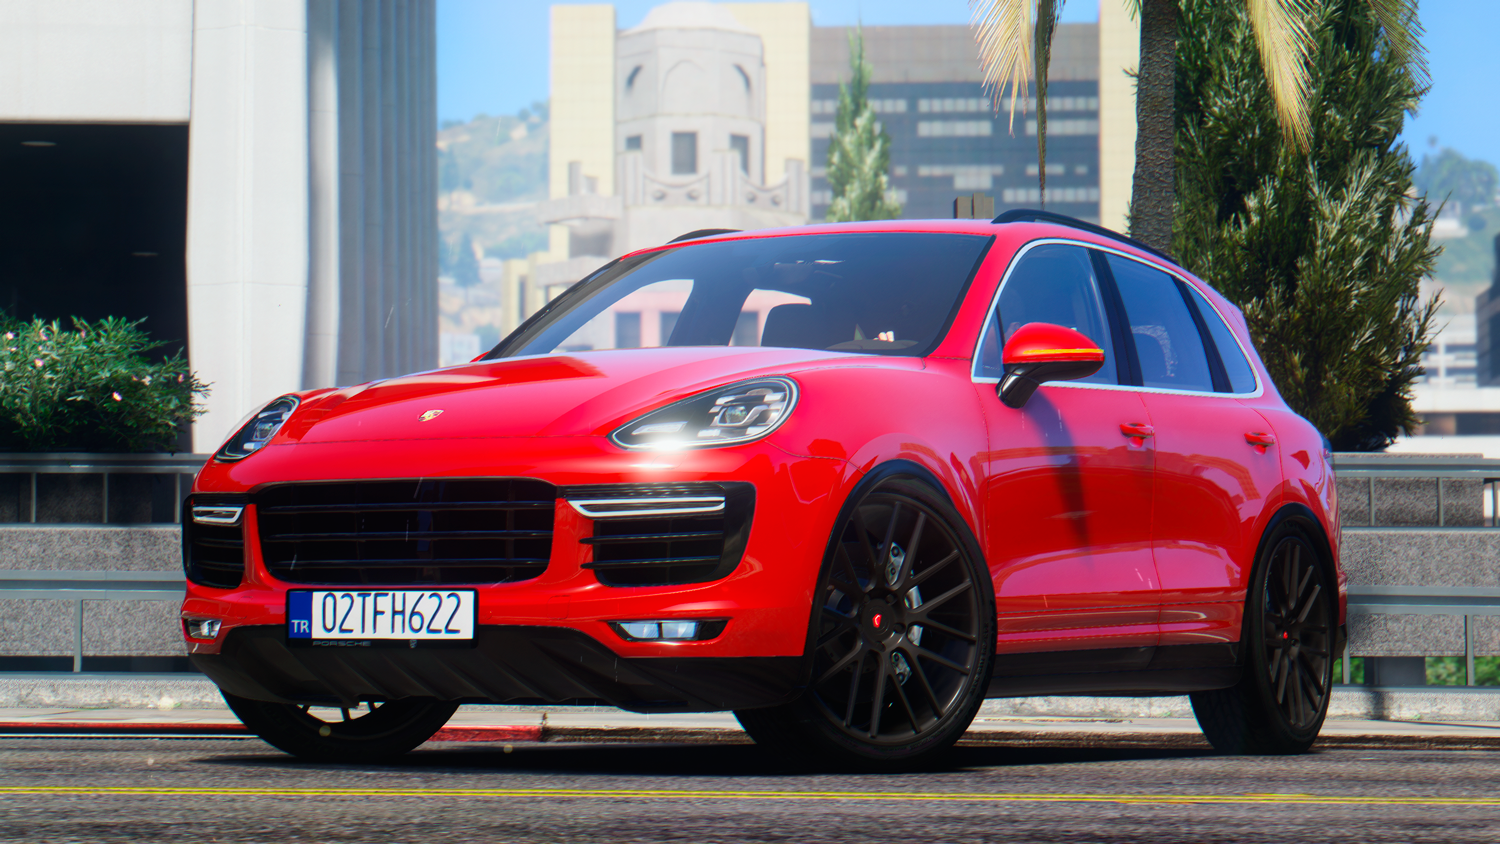 Porsche Cayenne Turbo S 2016 [Add-On / Replace] - Vehicules pour GTA V